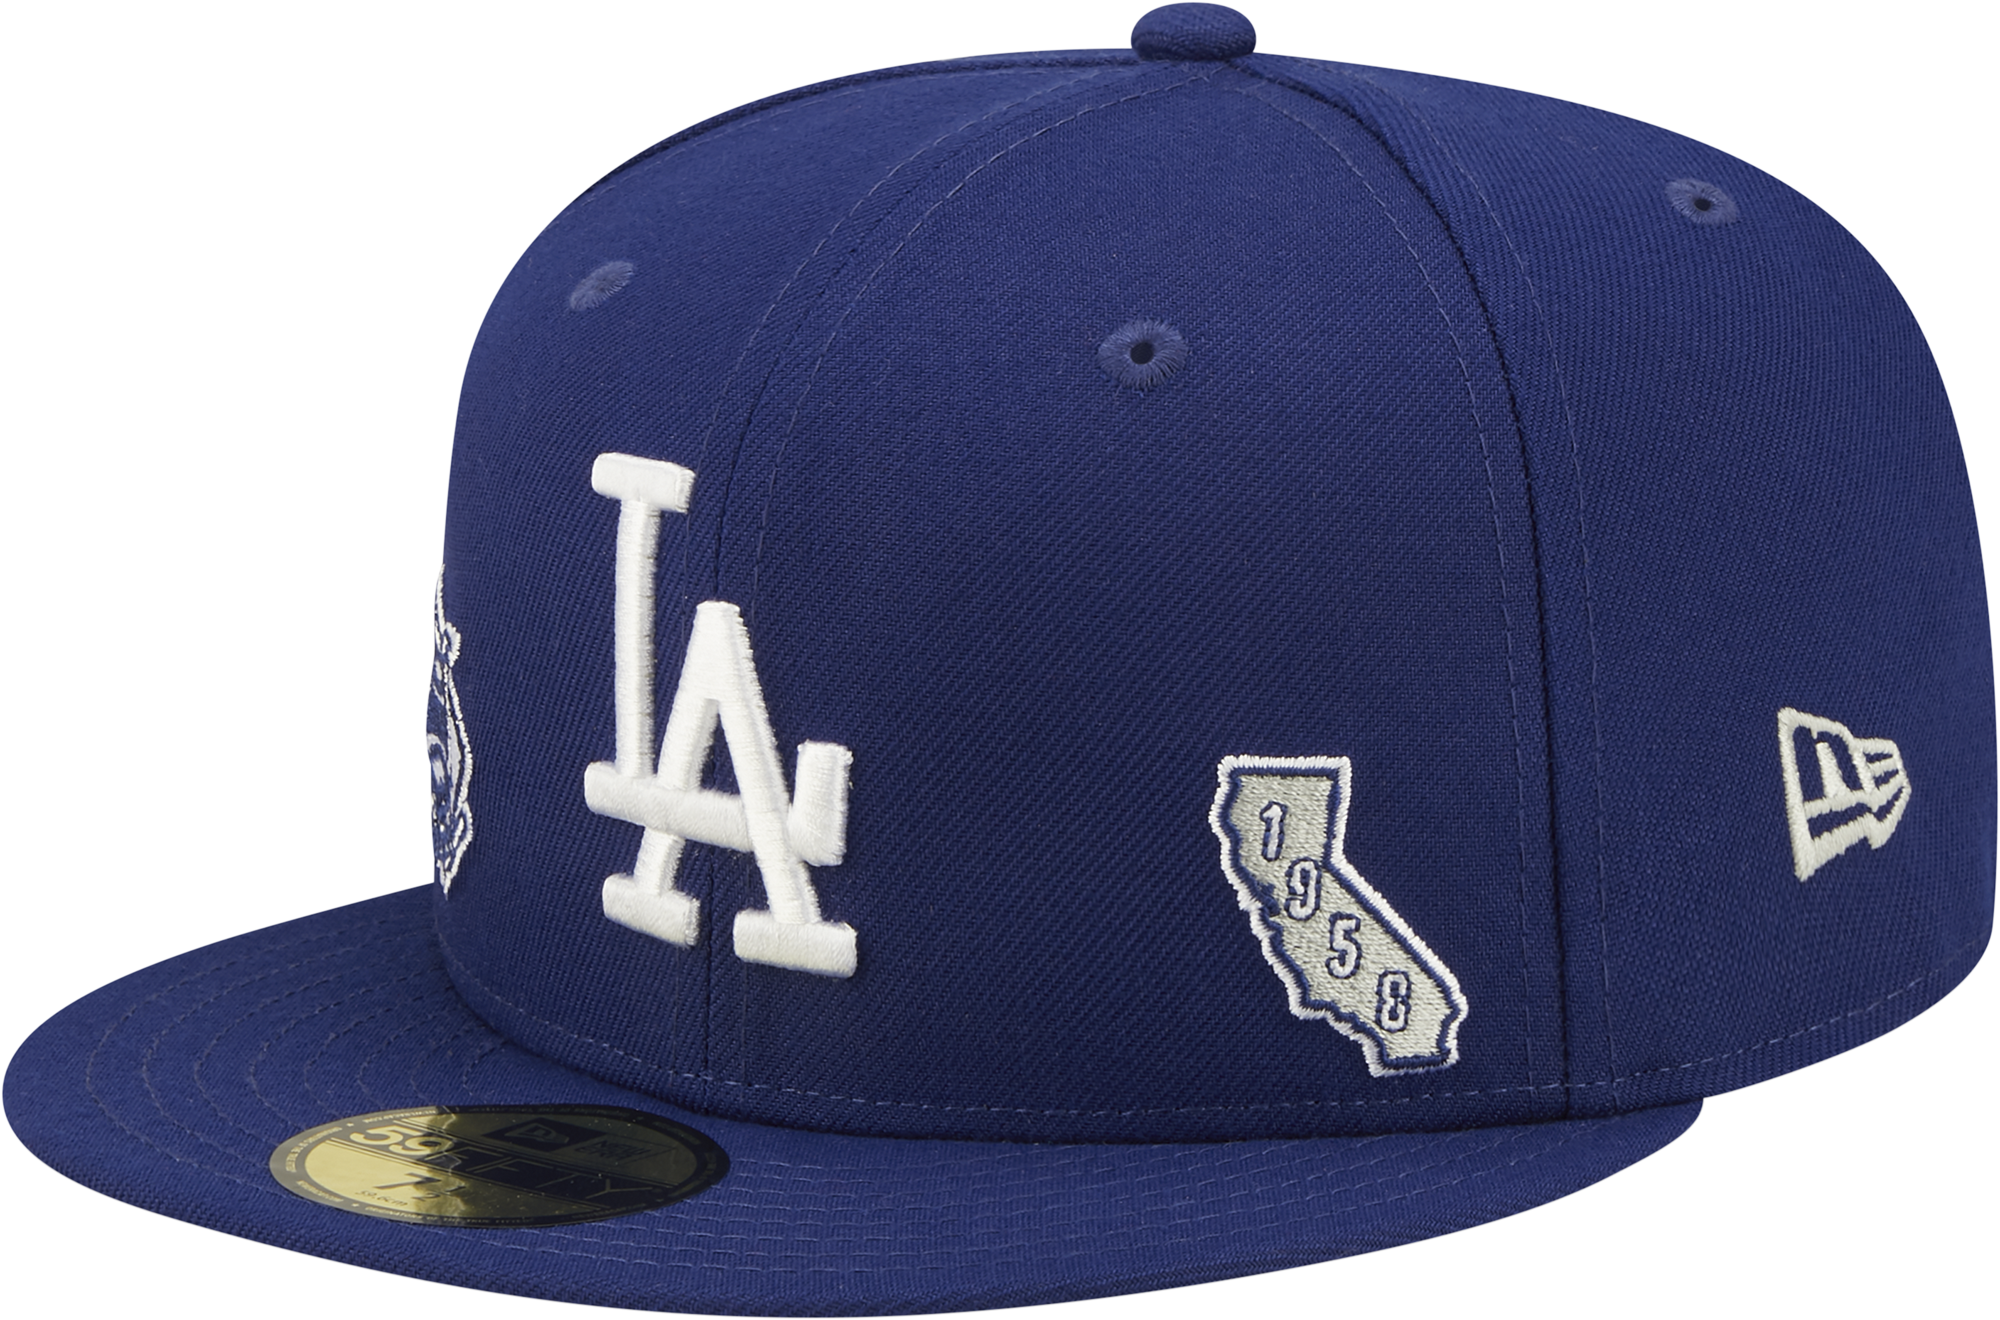 New Era Dodgers City Identity Fitted Cap